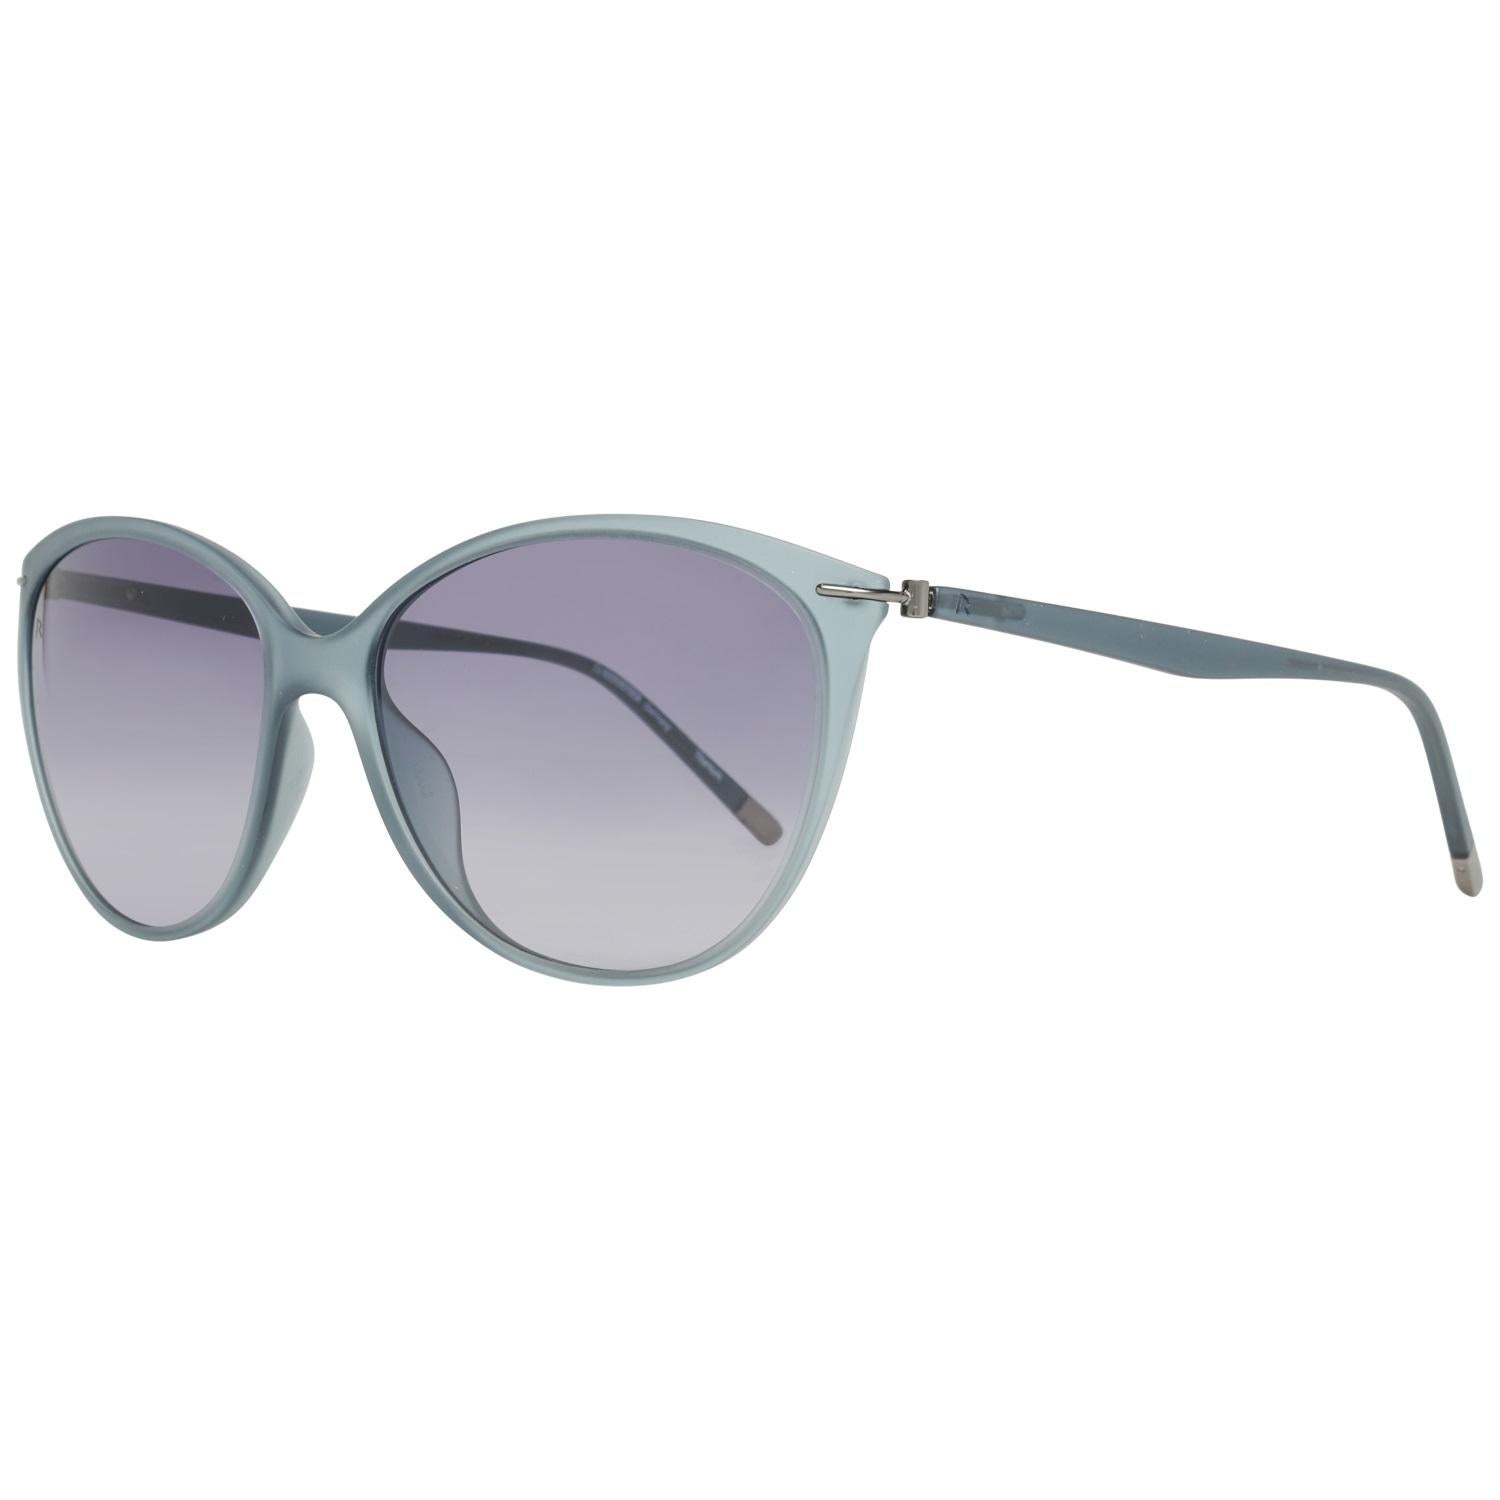 Details
MATERIAL: Titanium
COLOR: Grey
MODEL: R7412 D 57
GENDER: Women
COUNTRY OF MANUFACTURE: China
TYPE: Sunglasses
ORIGINAL CASE?: Yes
STYLE: Oval
OCCASION: Casual
FEATURES: Lightweight
LENS COLOR: Blue
LENS TECHNOLOGY: Gradient
YEAR